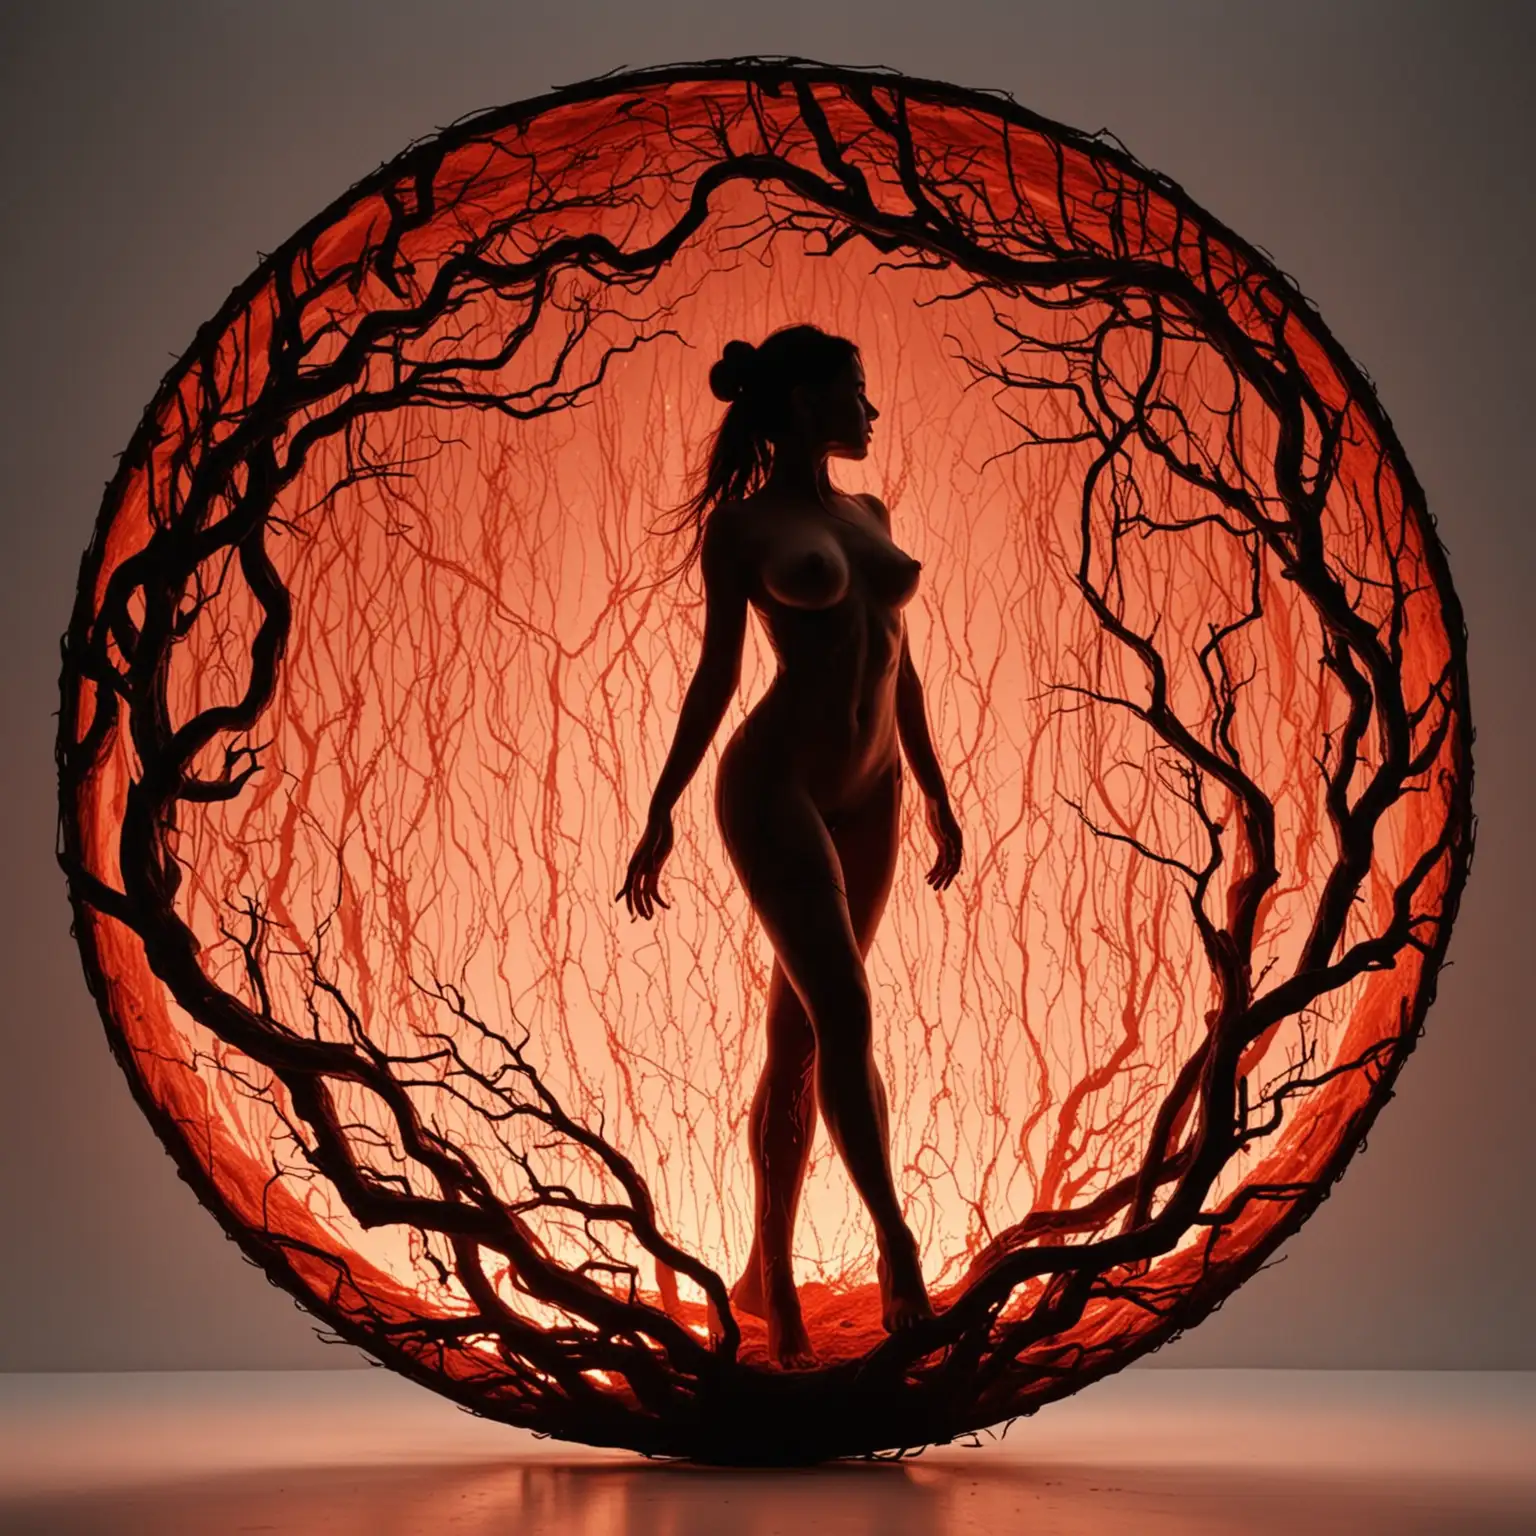 Oriental Flames Seductive Silhouettes Engulfed in Passion